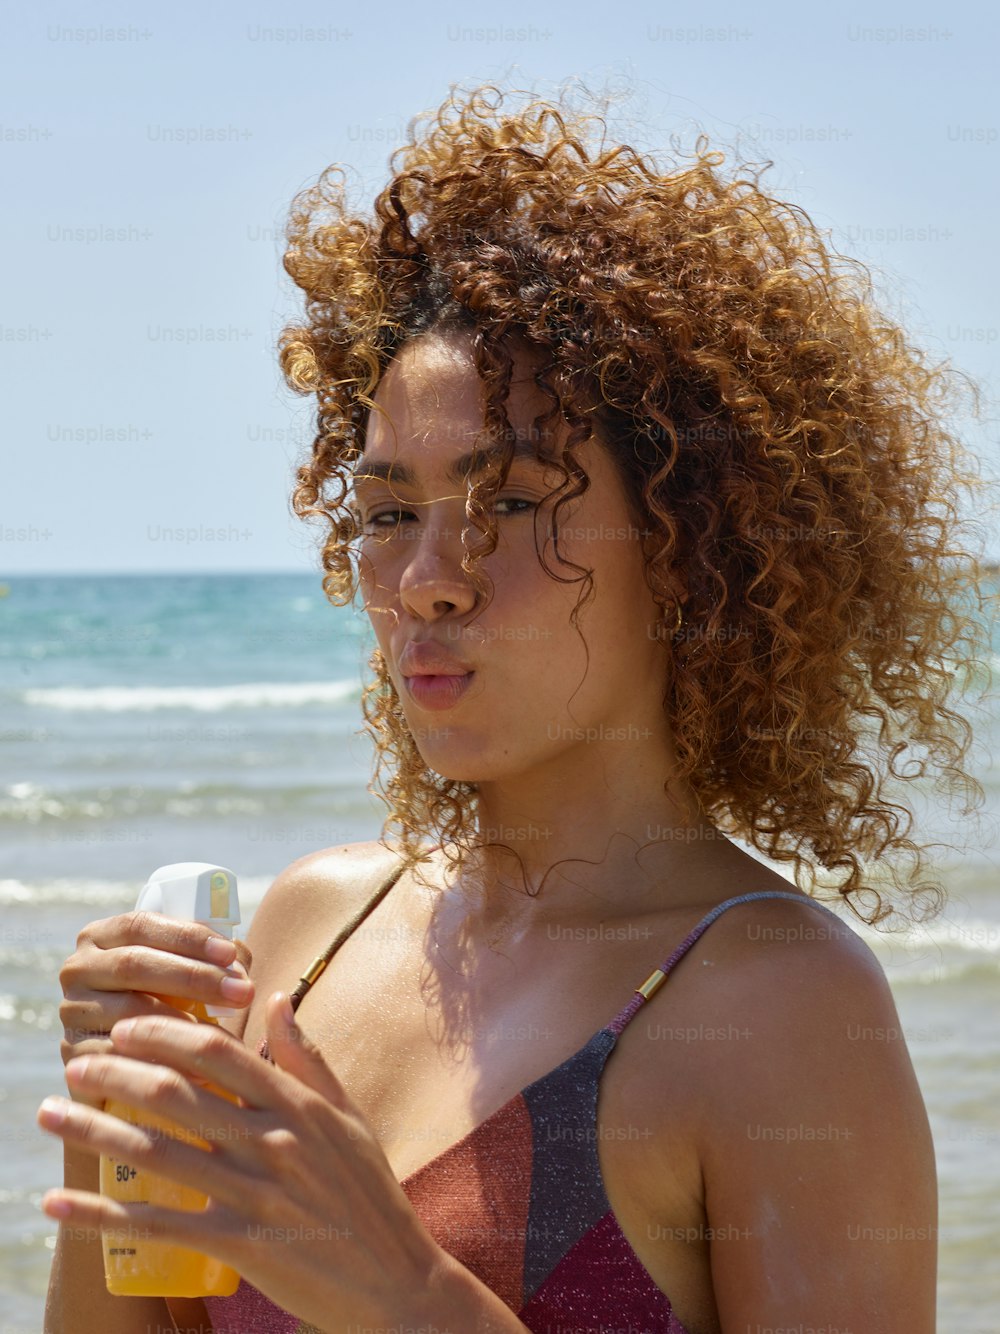 a woman with curly hair holding a bottle of sunscreen